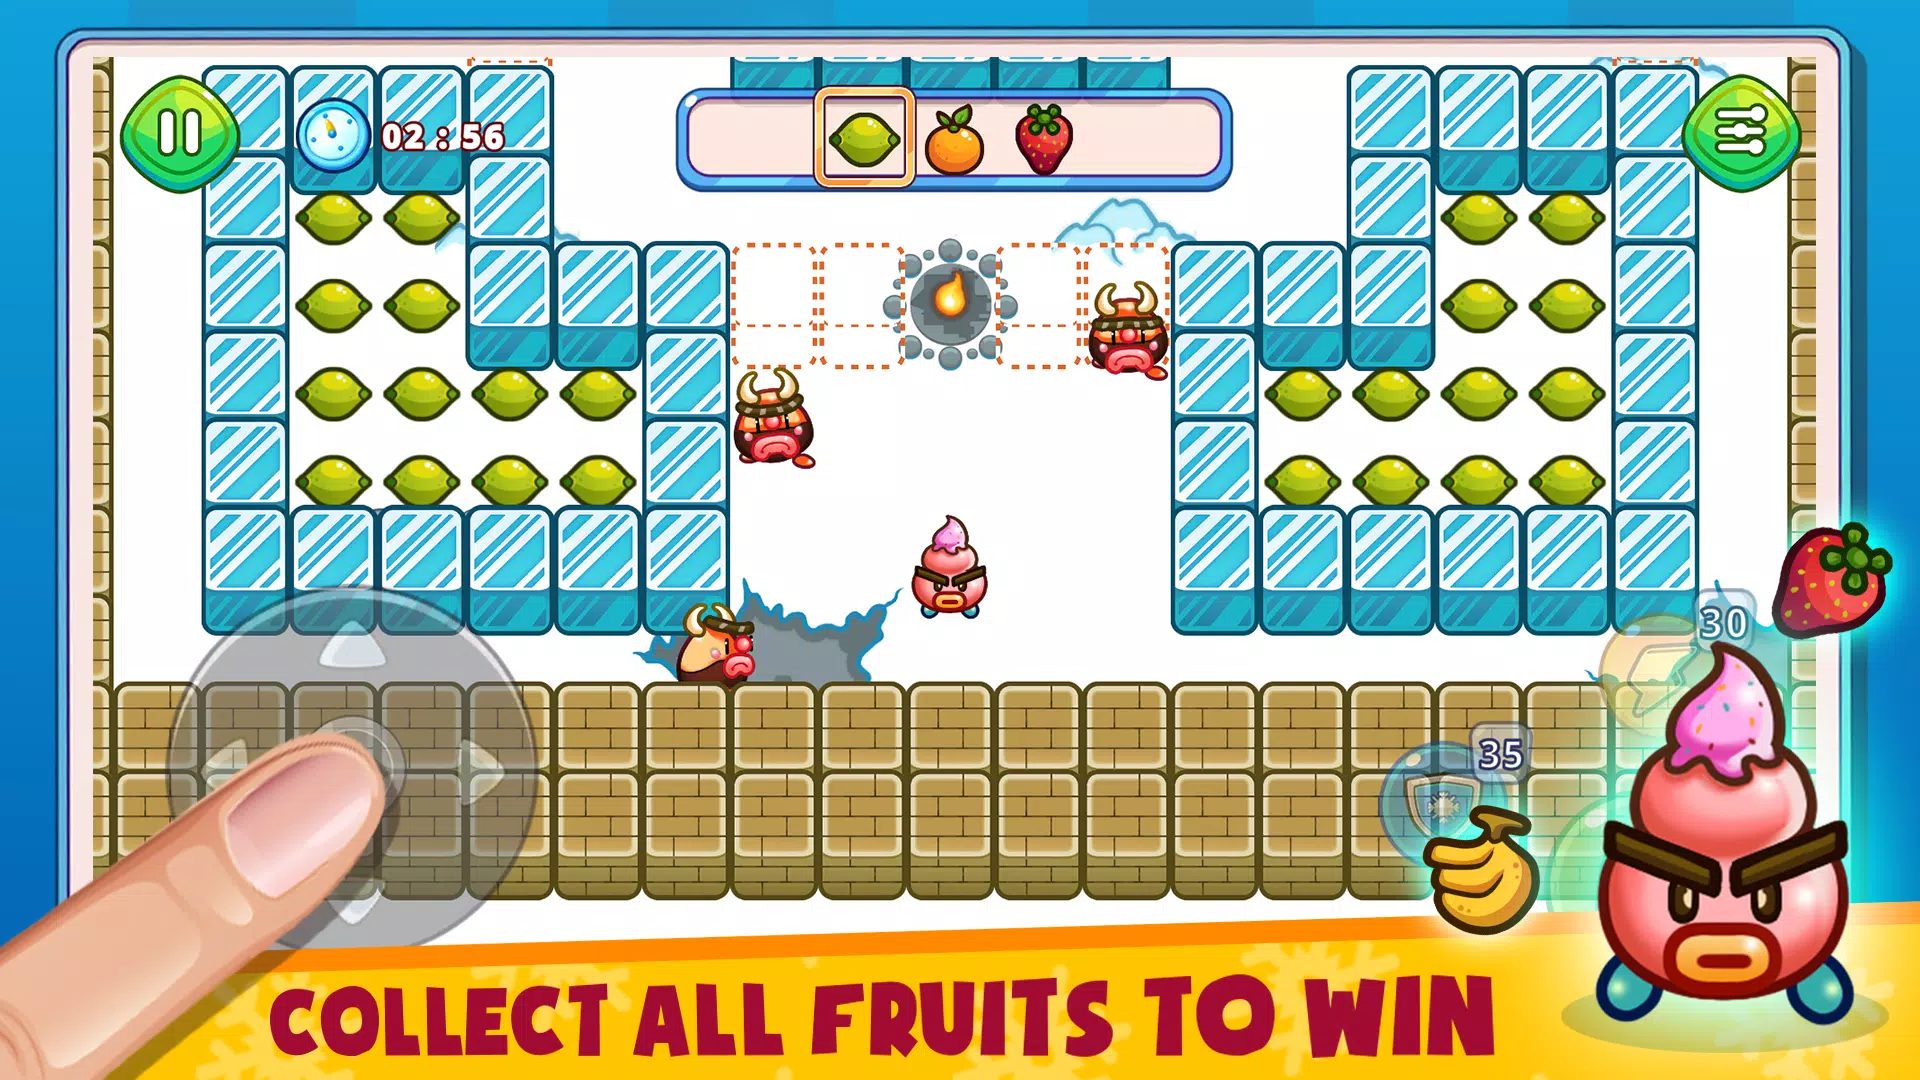 Bad Ice Cream 2: Icy Maze Game Apk Download for Android- Latest version 1-  com.bin.bad.ice.cream2.mazegame